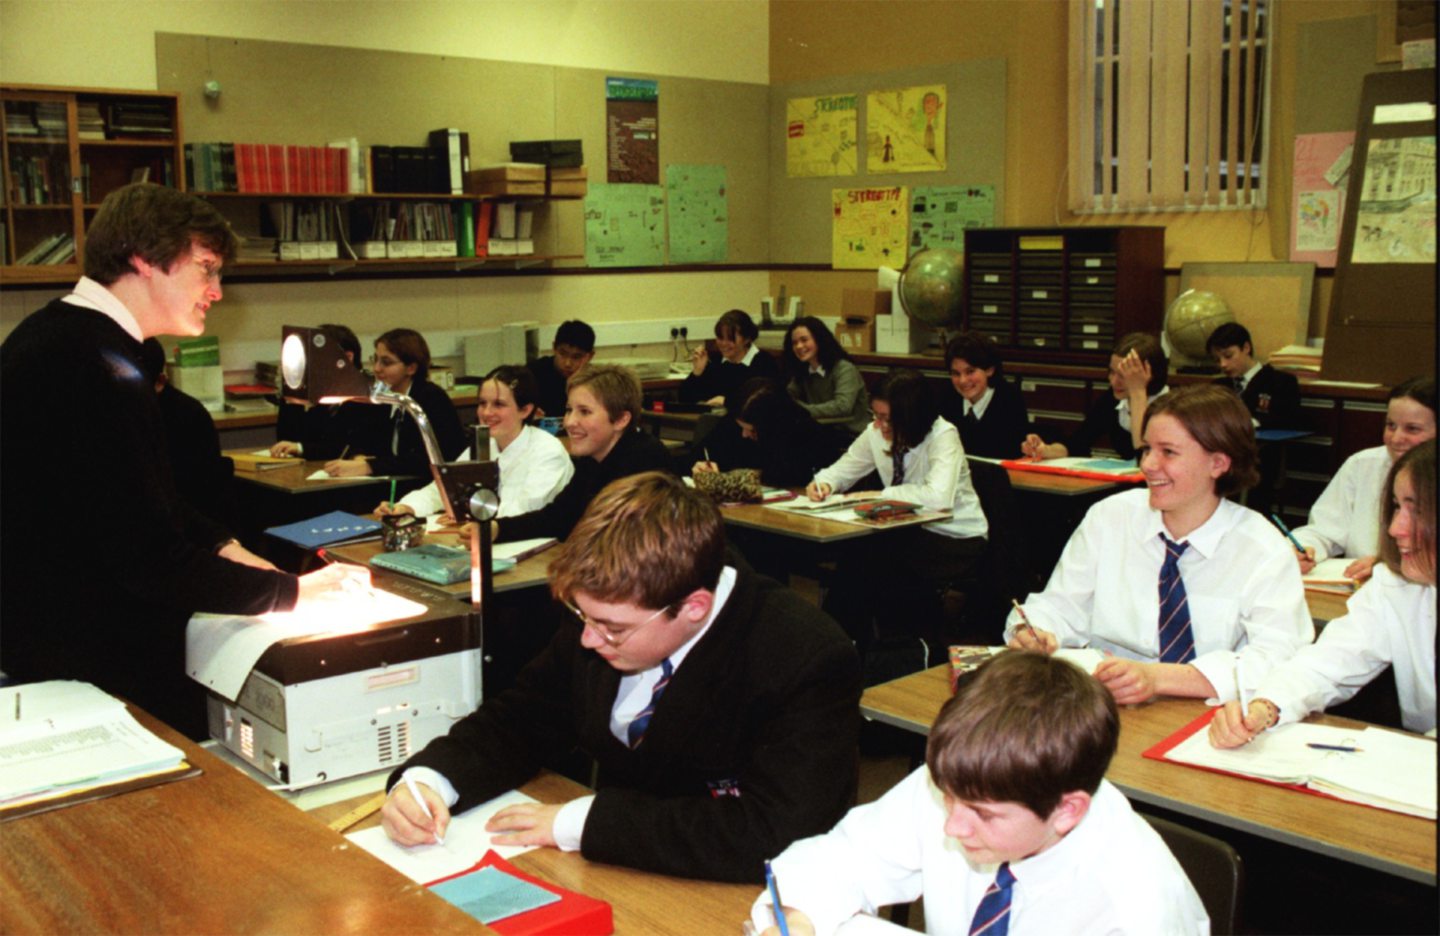 A Geography class at work in 1998.